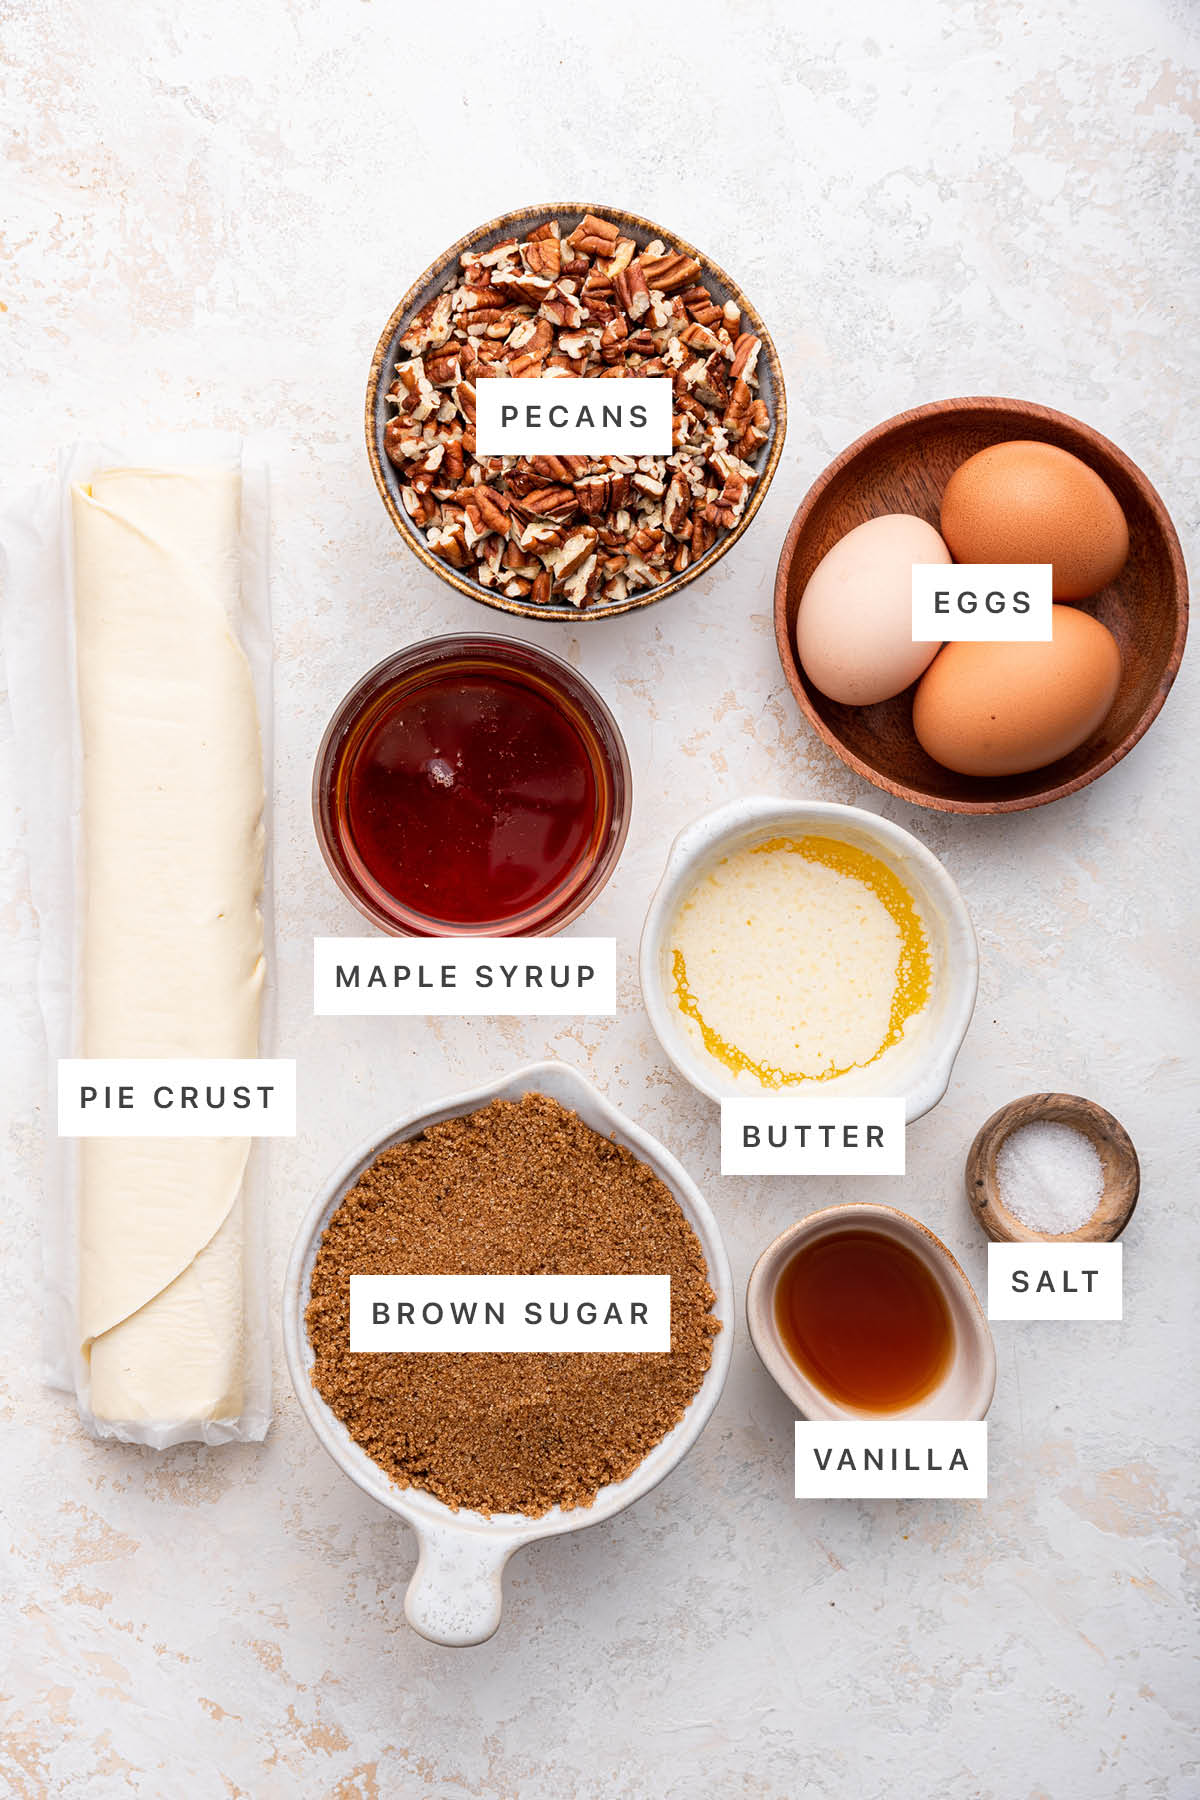 Ingredients measured out to make Easy Pecan Pie: pie curst, pecans, maple syrup, eggs, butter, brown sugar, vanilla and salt.